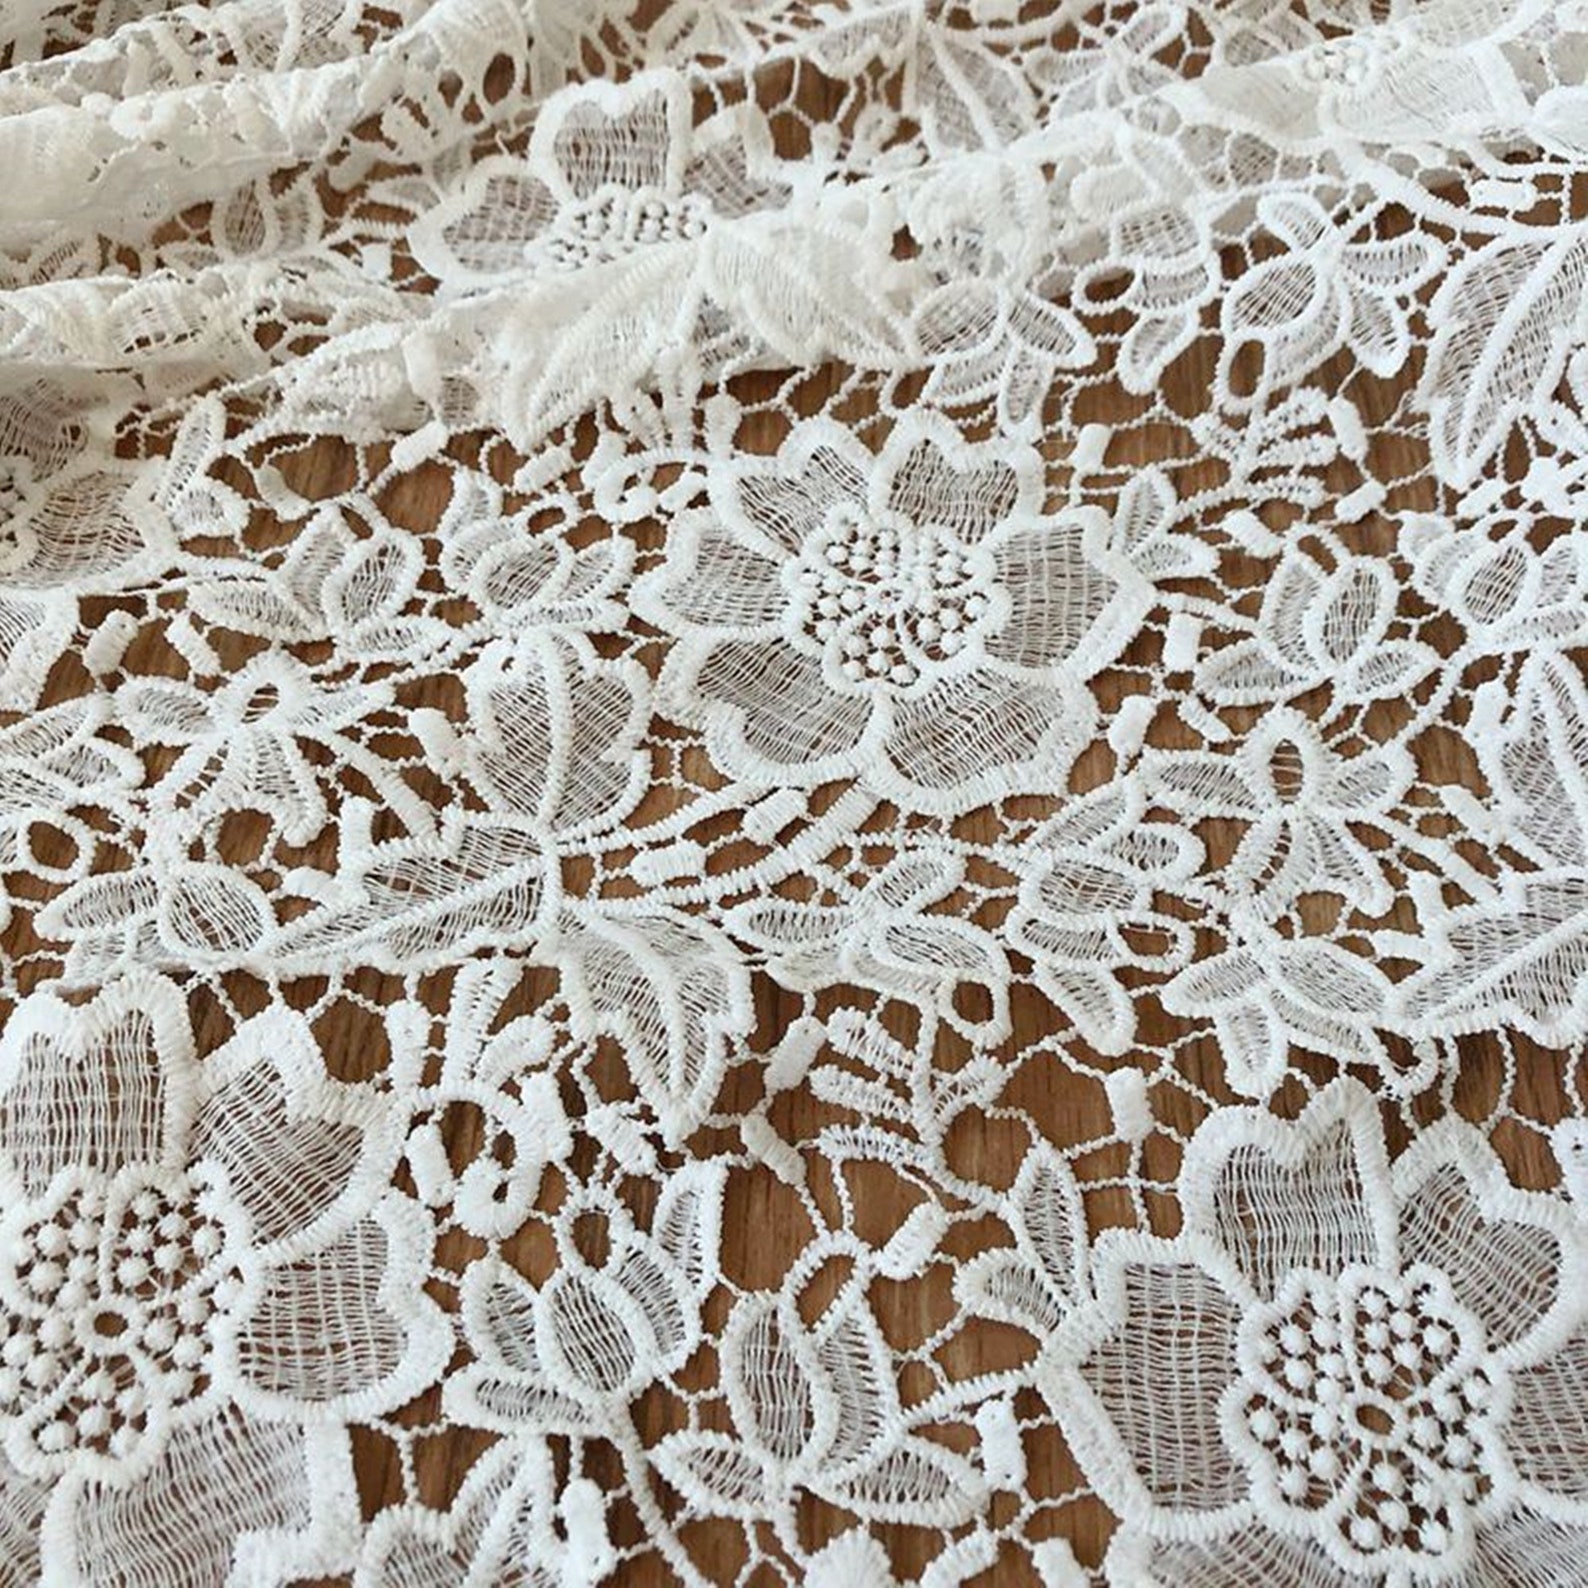 Retro Guipure Lace Fabric Hollow Out Floral Lace Fabric | Etsy